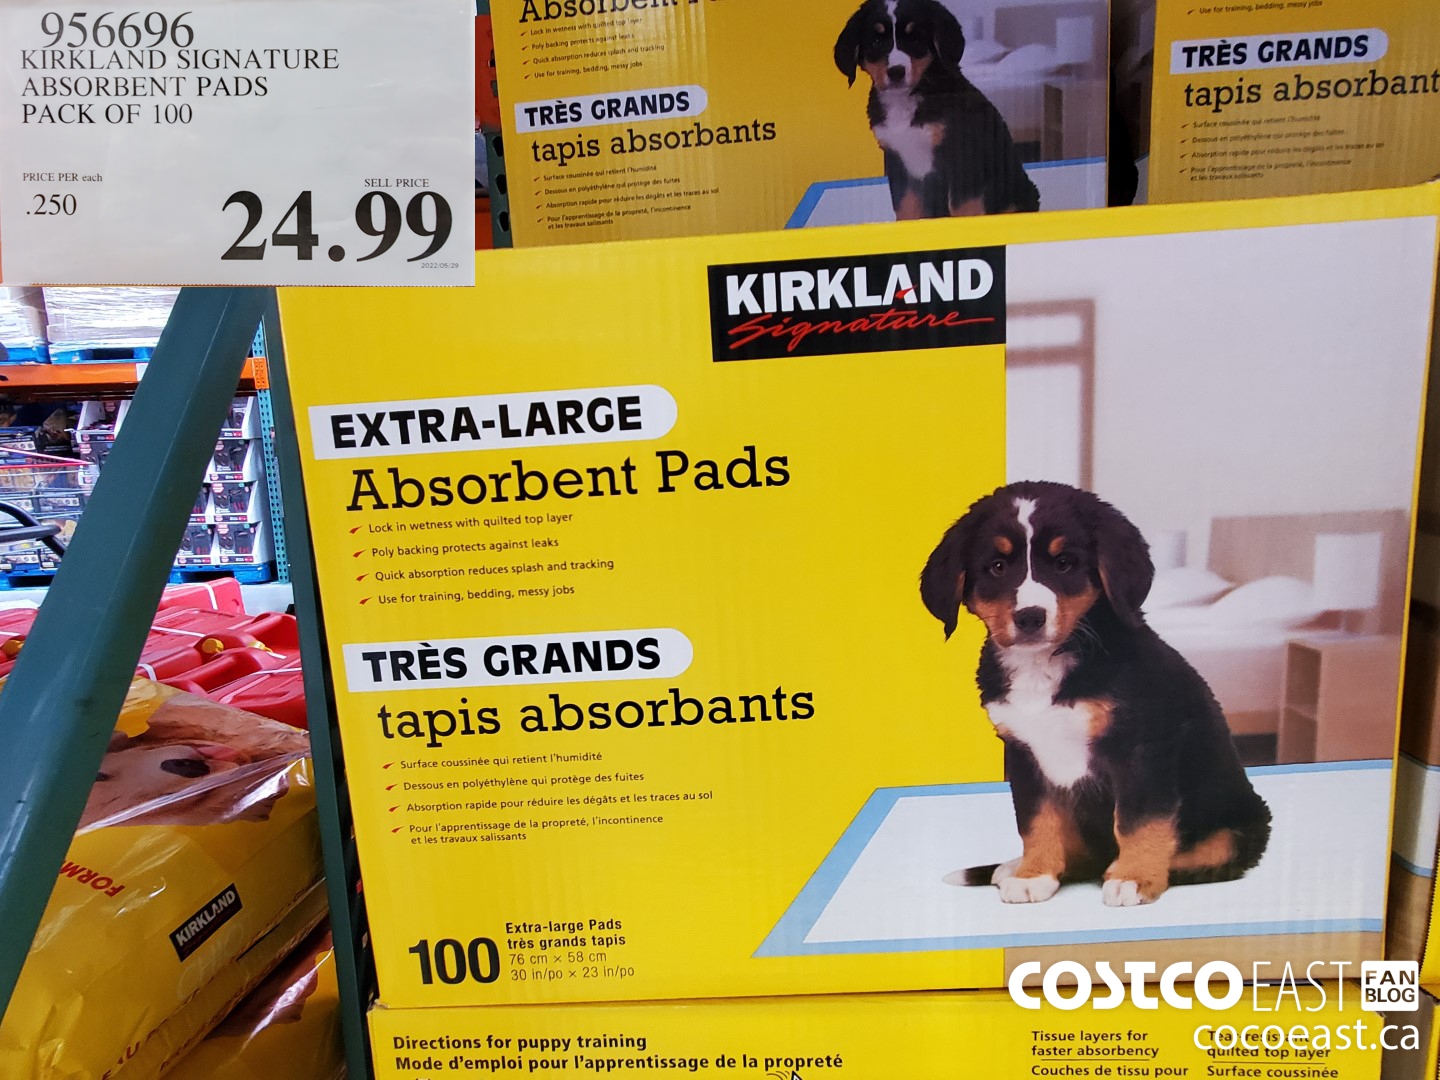 https://east.cocowest1.ca/2022/07/KIRKLAND_SIGNATURE_ABSORBANT_PADS_PACK_OF_100_20220706_57072.jpg